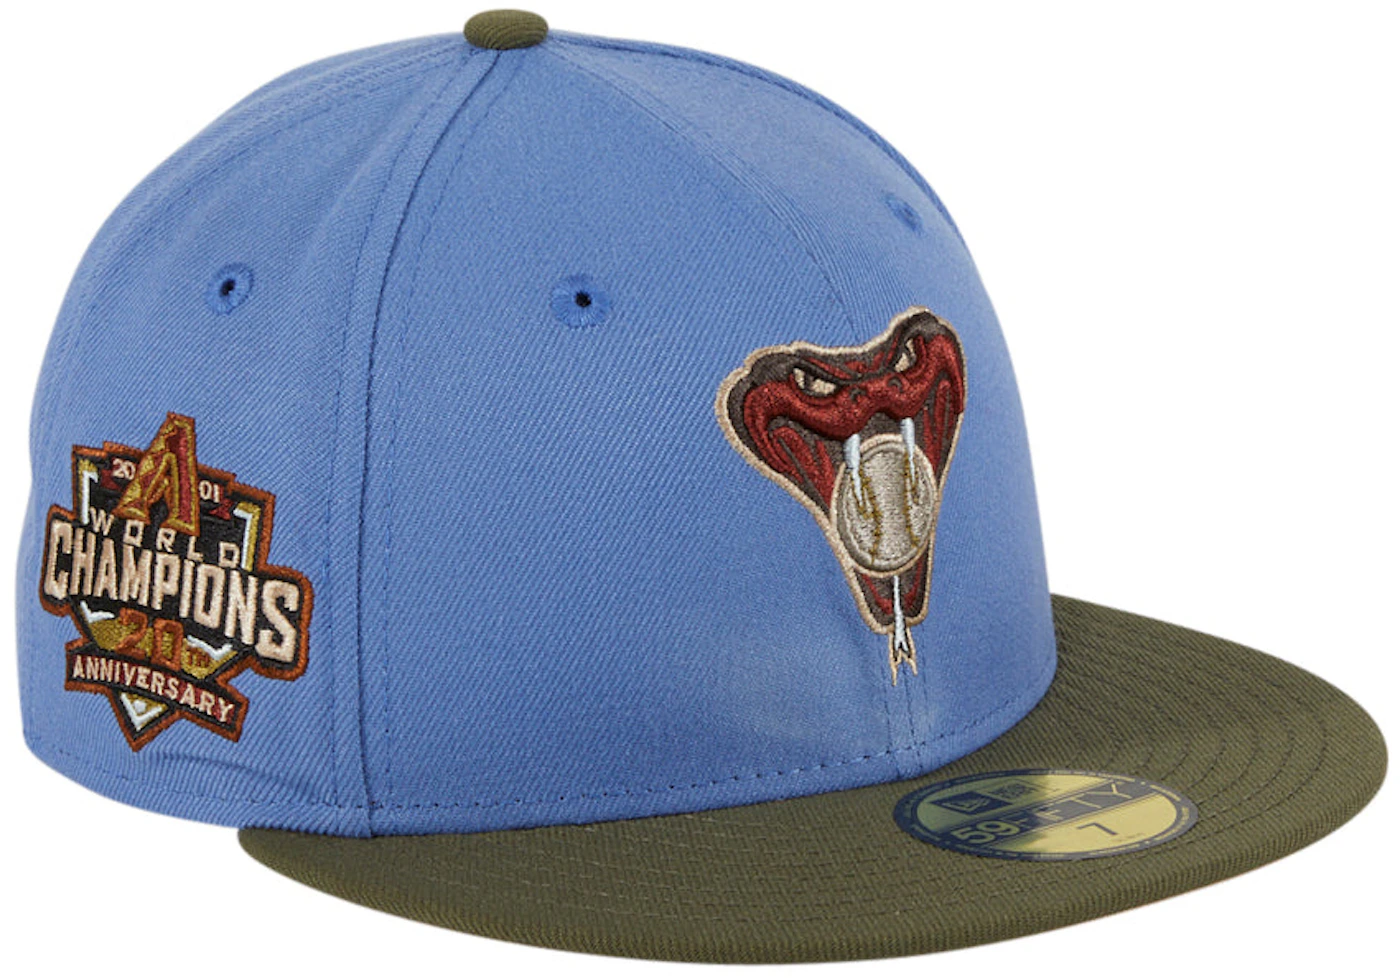 New Era Arizona Diamondbacks Great Outdoors 20th Anniversary Patch Snakehead Hat Club Exclusive 59FIFTY Fitted Hat Indigo/Olive